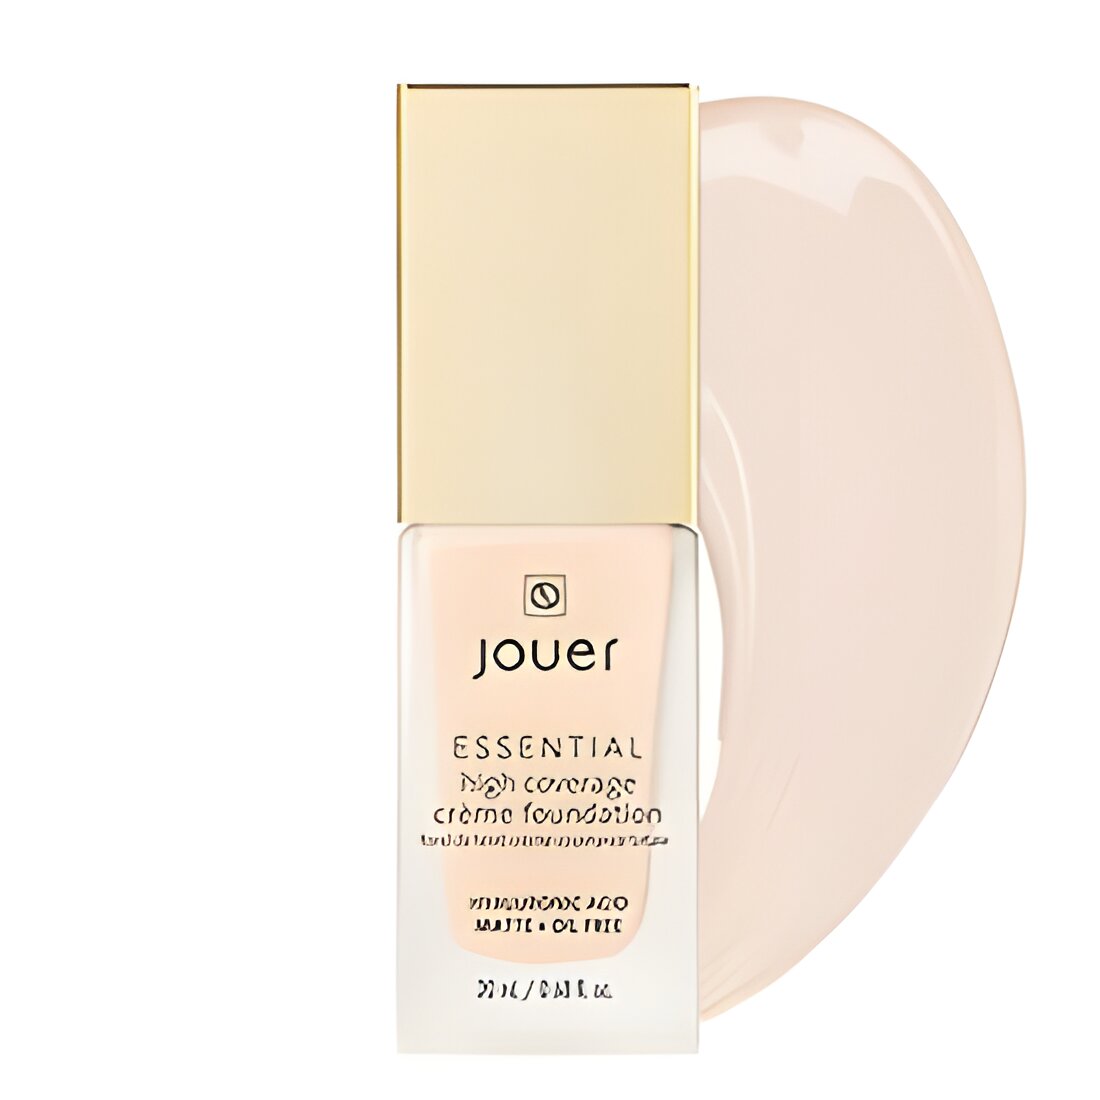 Free Jouer Cosmetics Essential High Coverage Creme Foundation Sample Packets